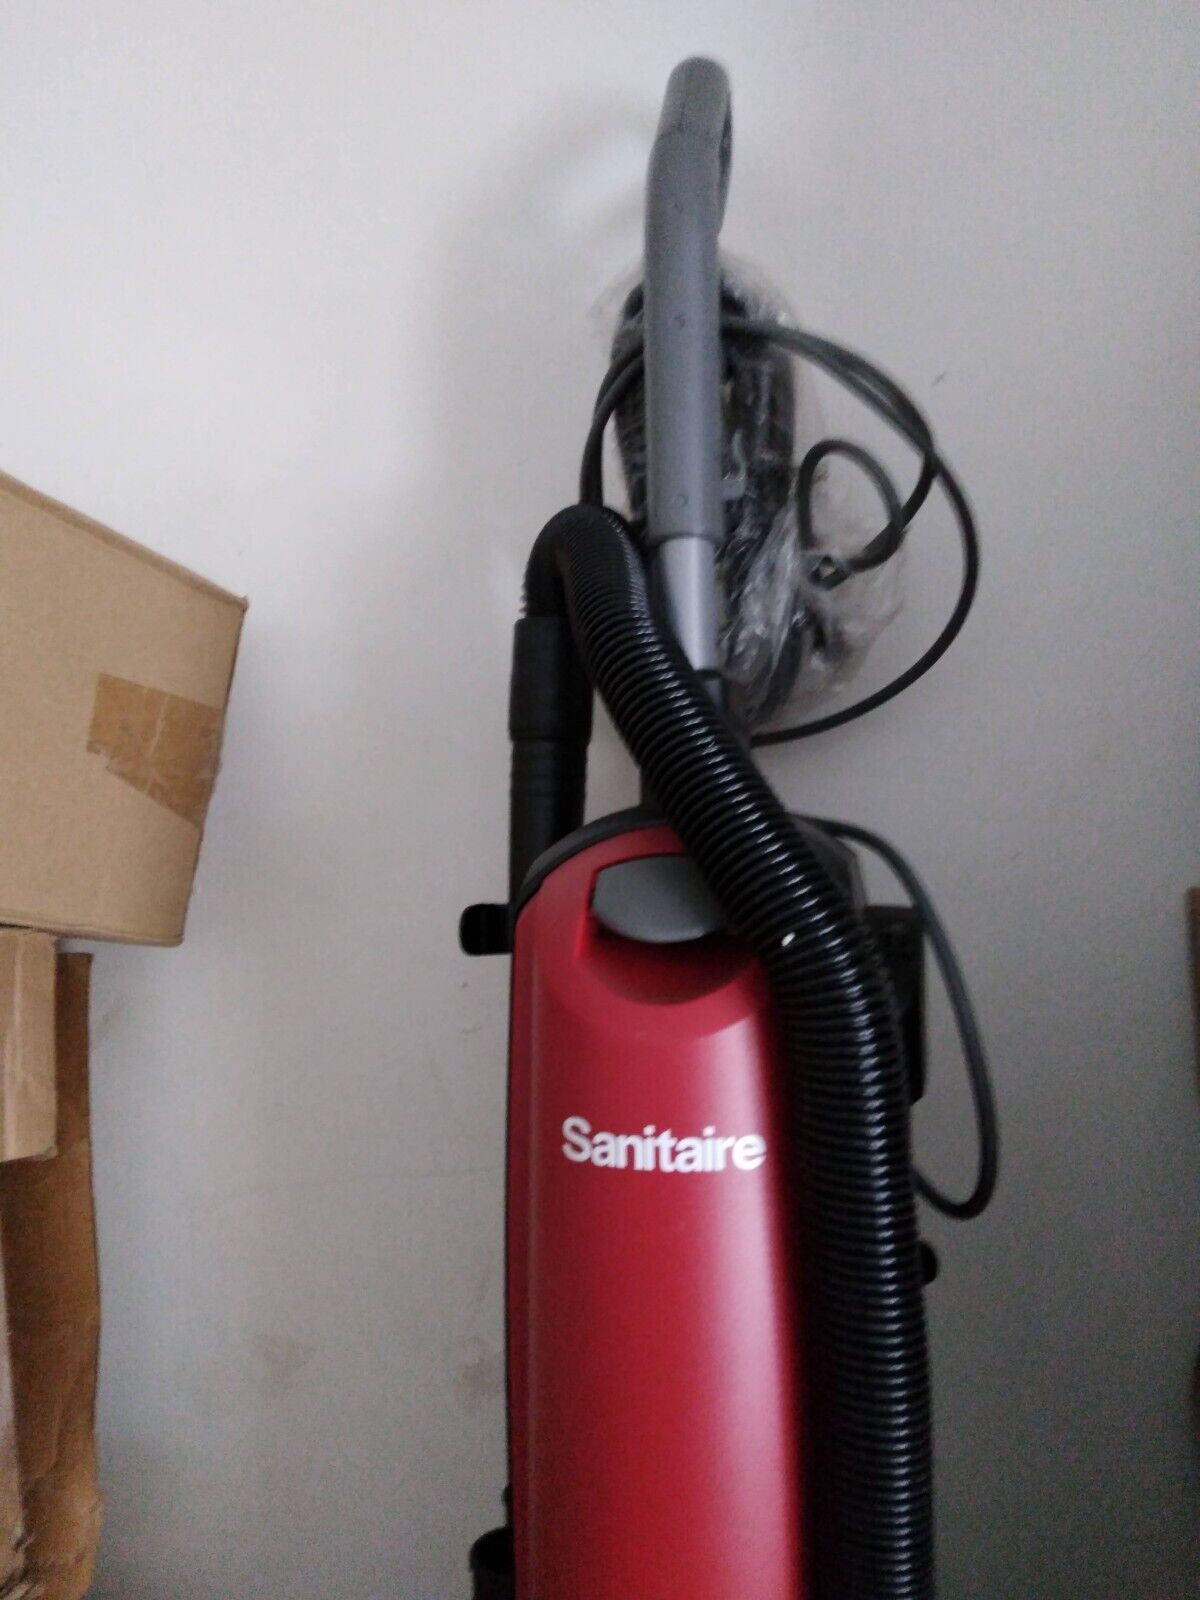 Sanitaire�  Upright Vacuum,  (Filter And Extension Is Missing]  See The Pictures